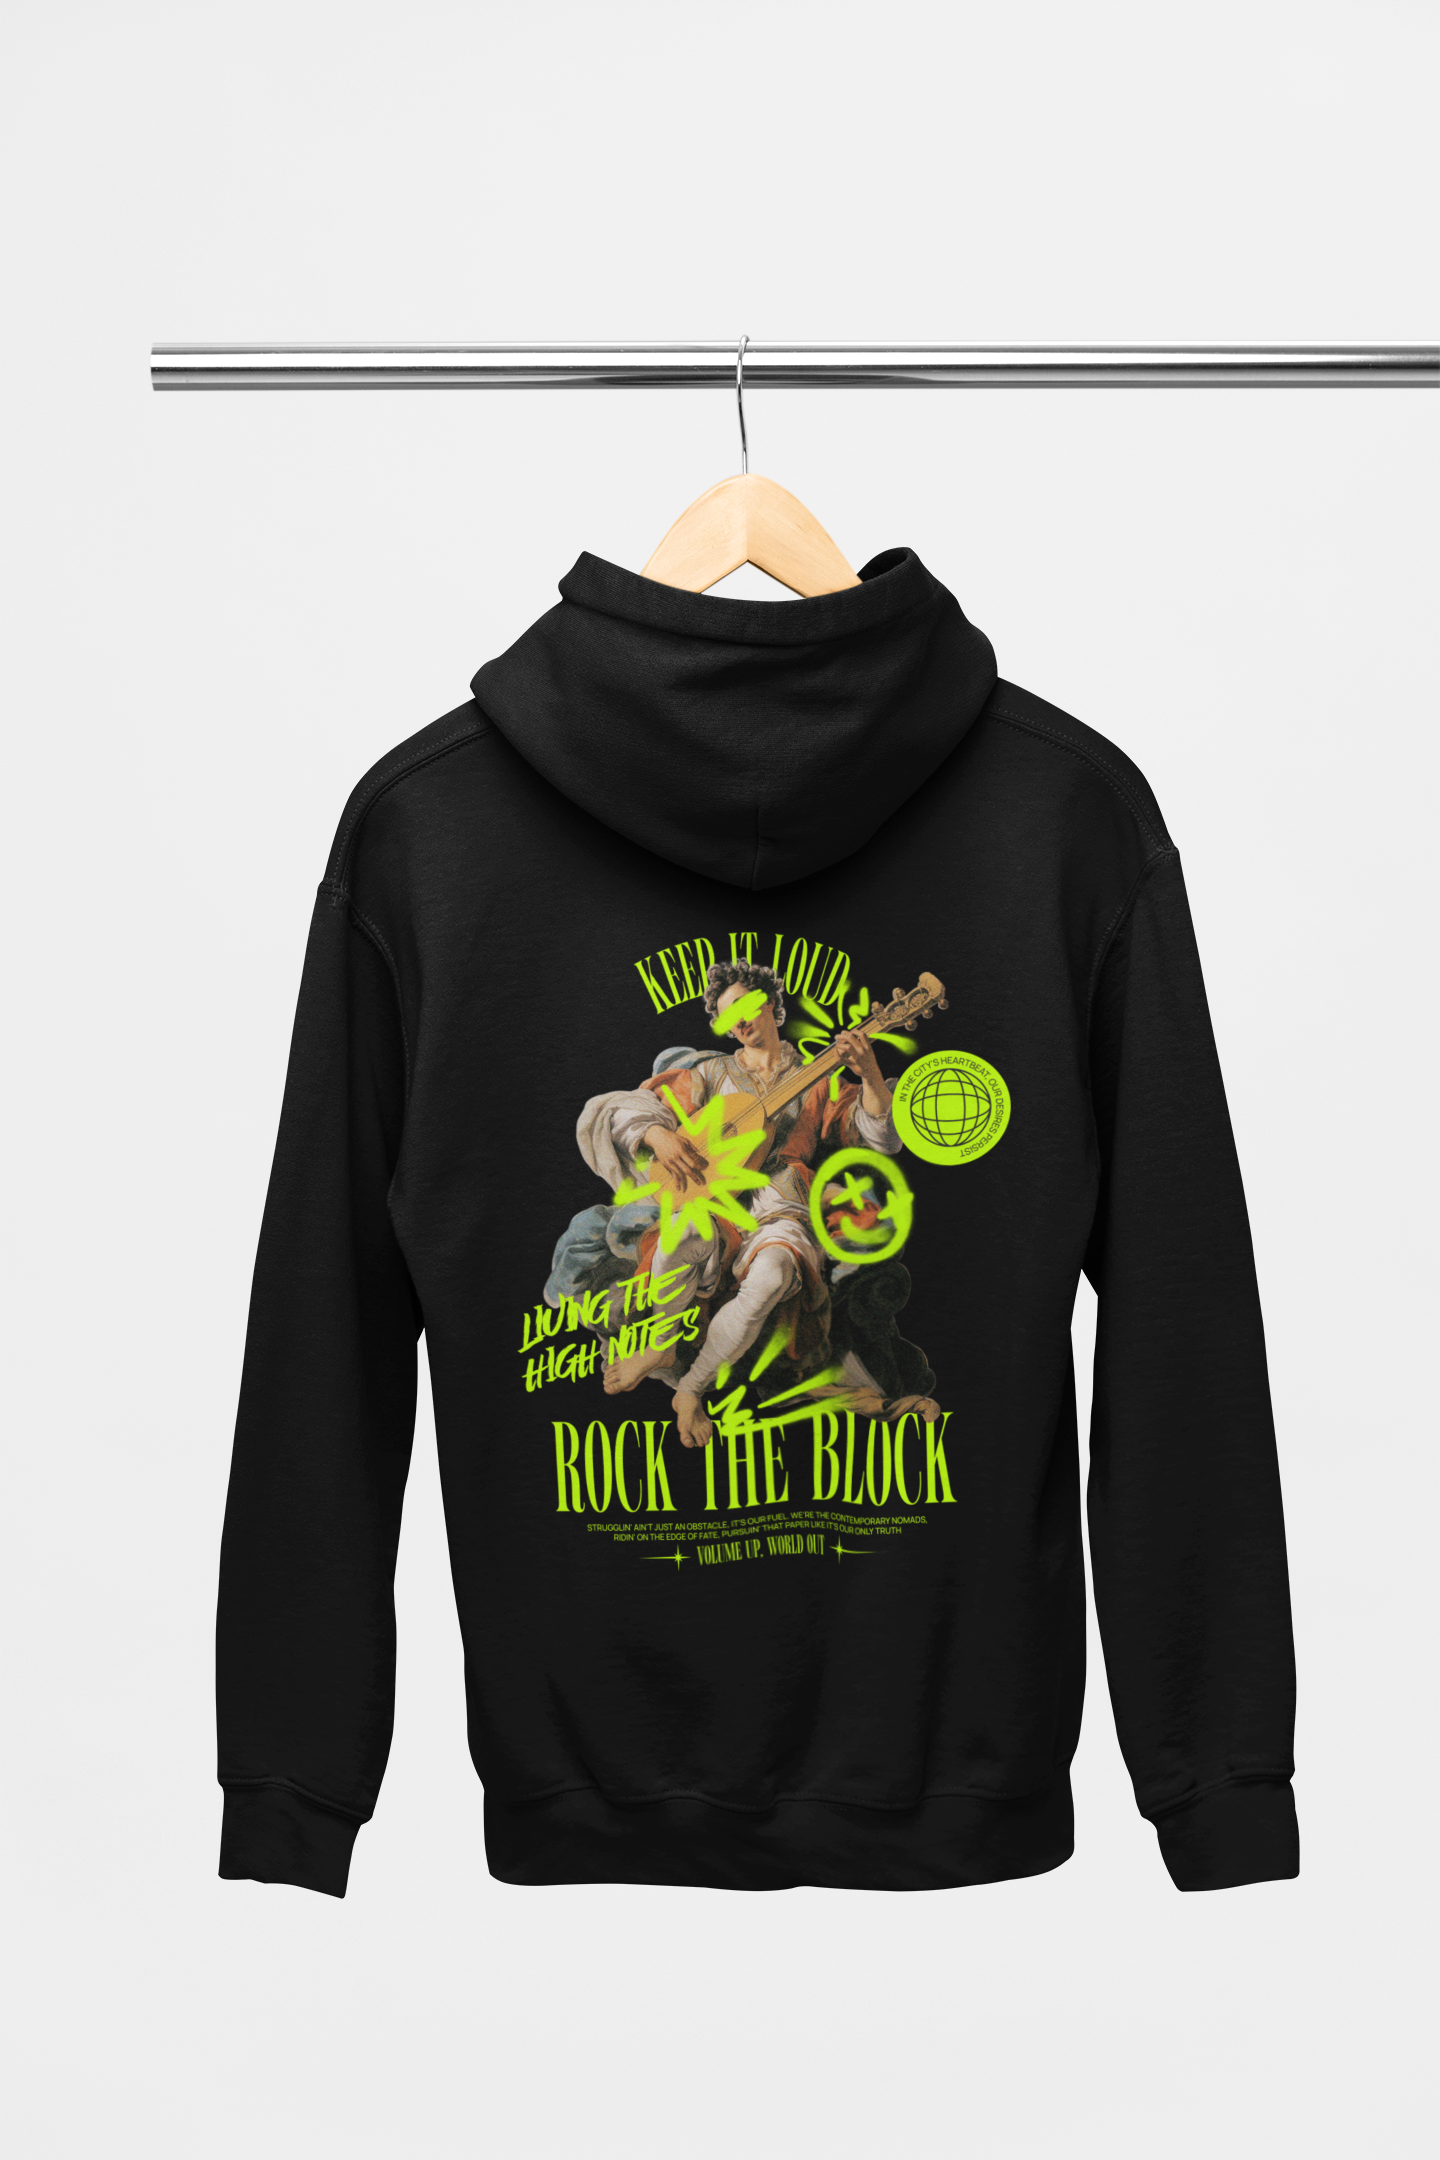 HOODIE BLACK: LUNG THE HIGH NOTE